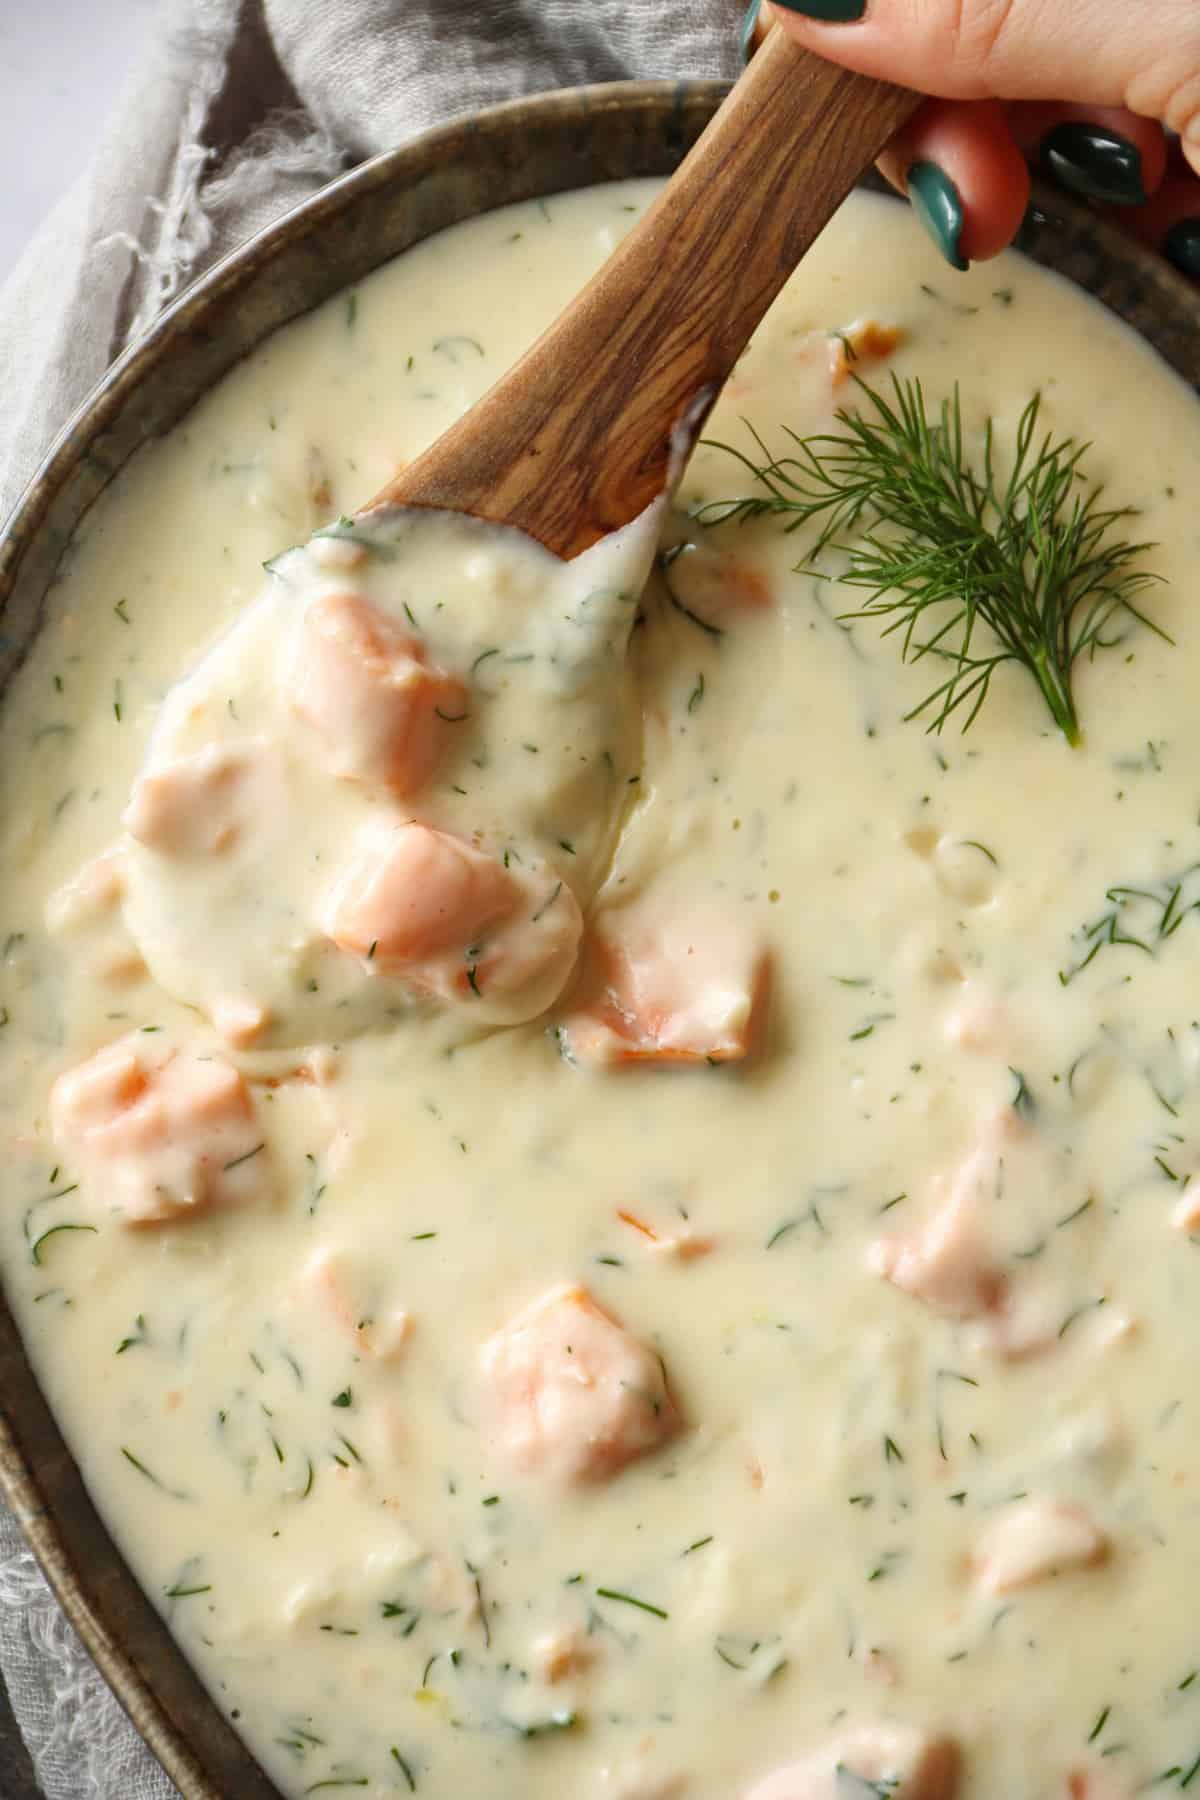 A close-up of a bowl of salmon and cream sauce.